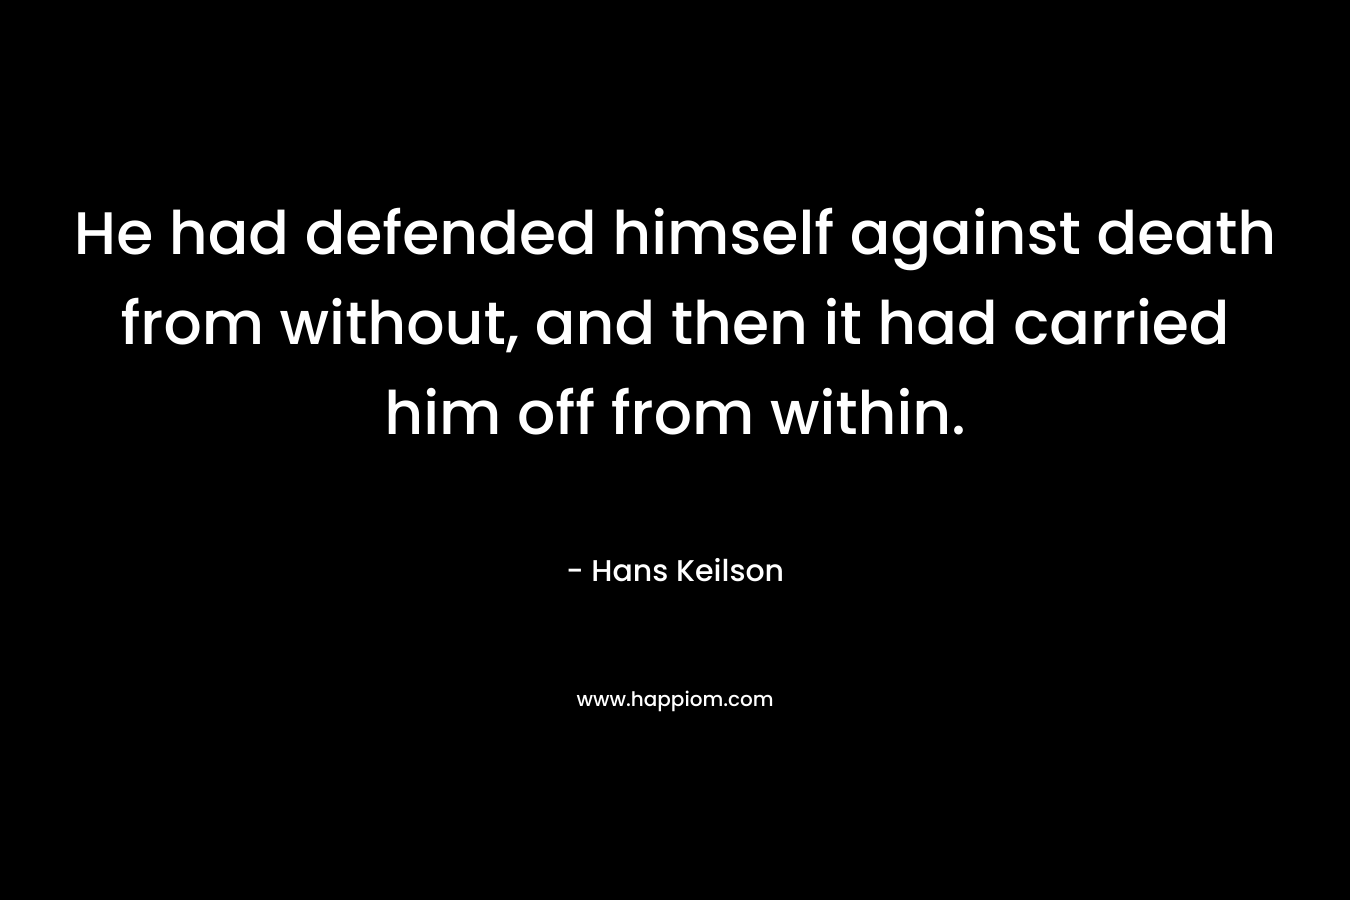 He had defended himself against death from without, and then it had carried him off from within. – Hans Keilson